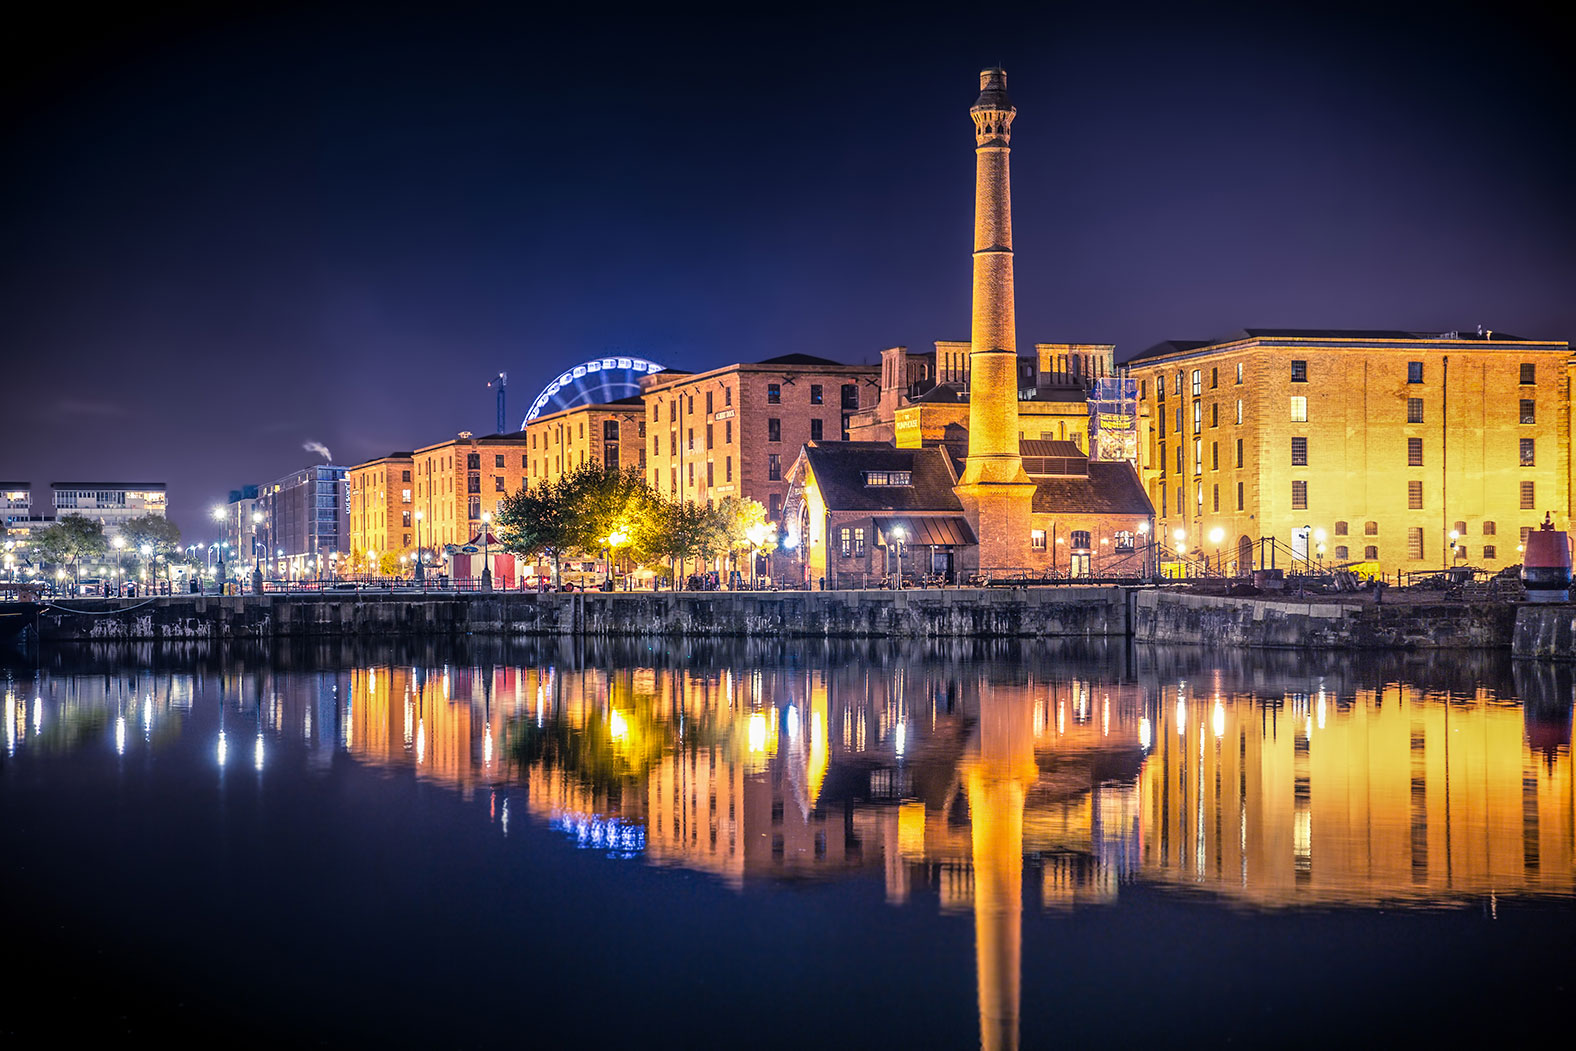 Liverpool at night, on the banks of the river Mersey